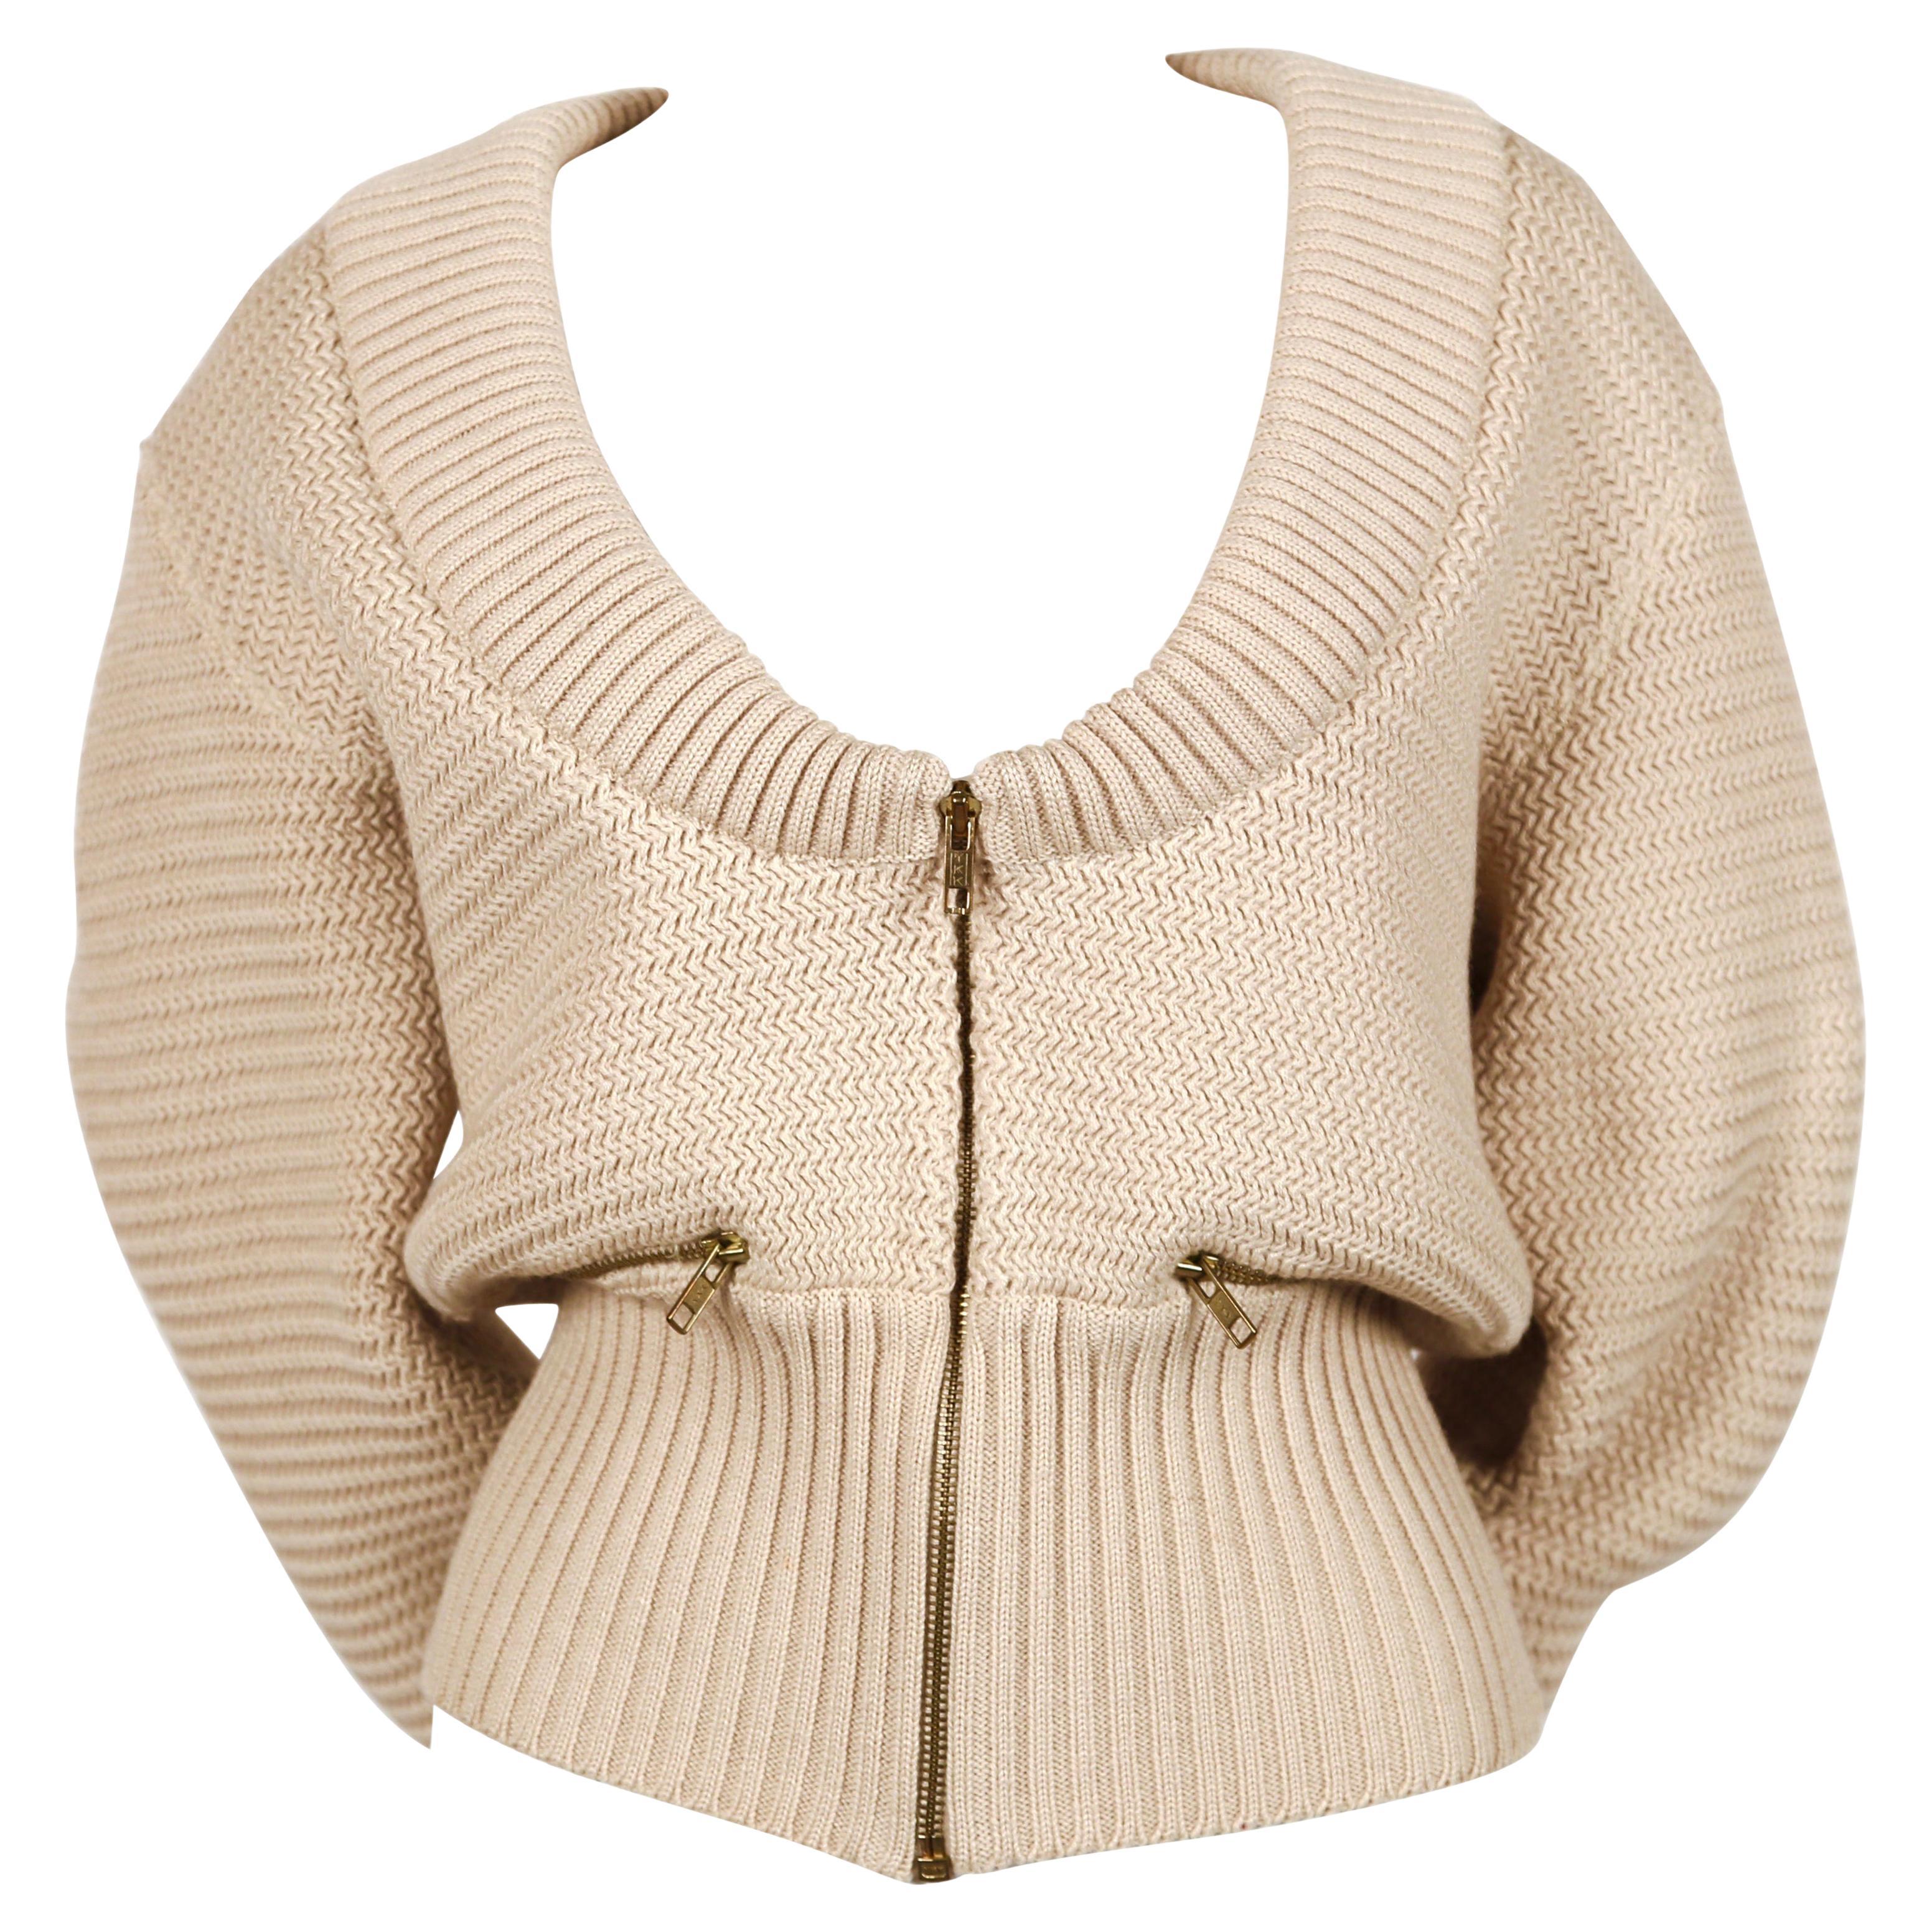 1985 AZZEDINE ALAIA heavy knit cardigan sweater coat with zippers For Sale